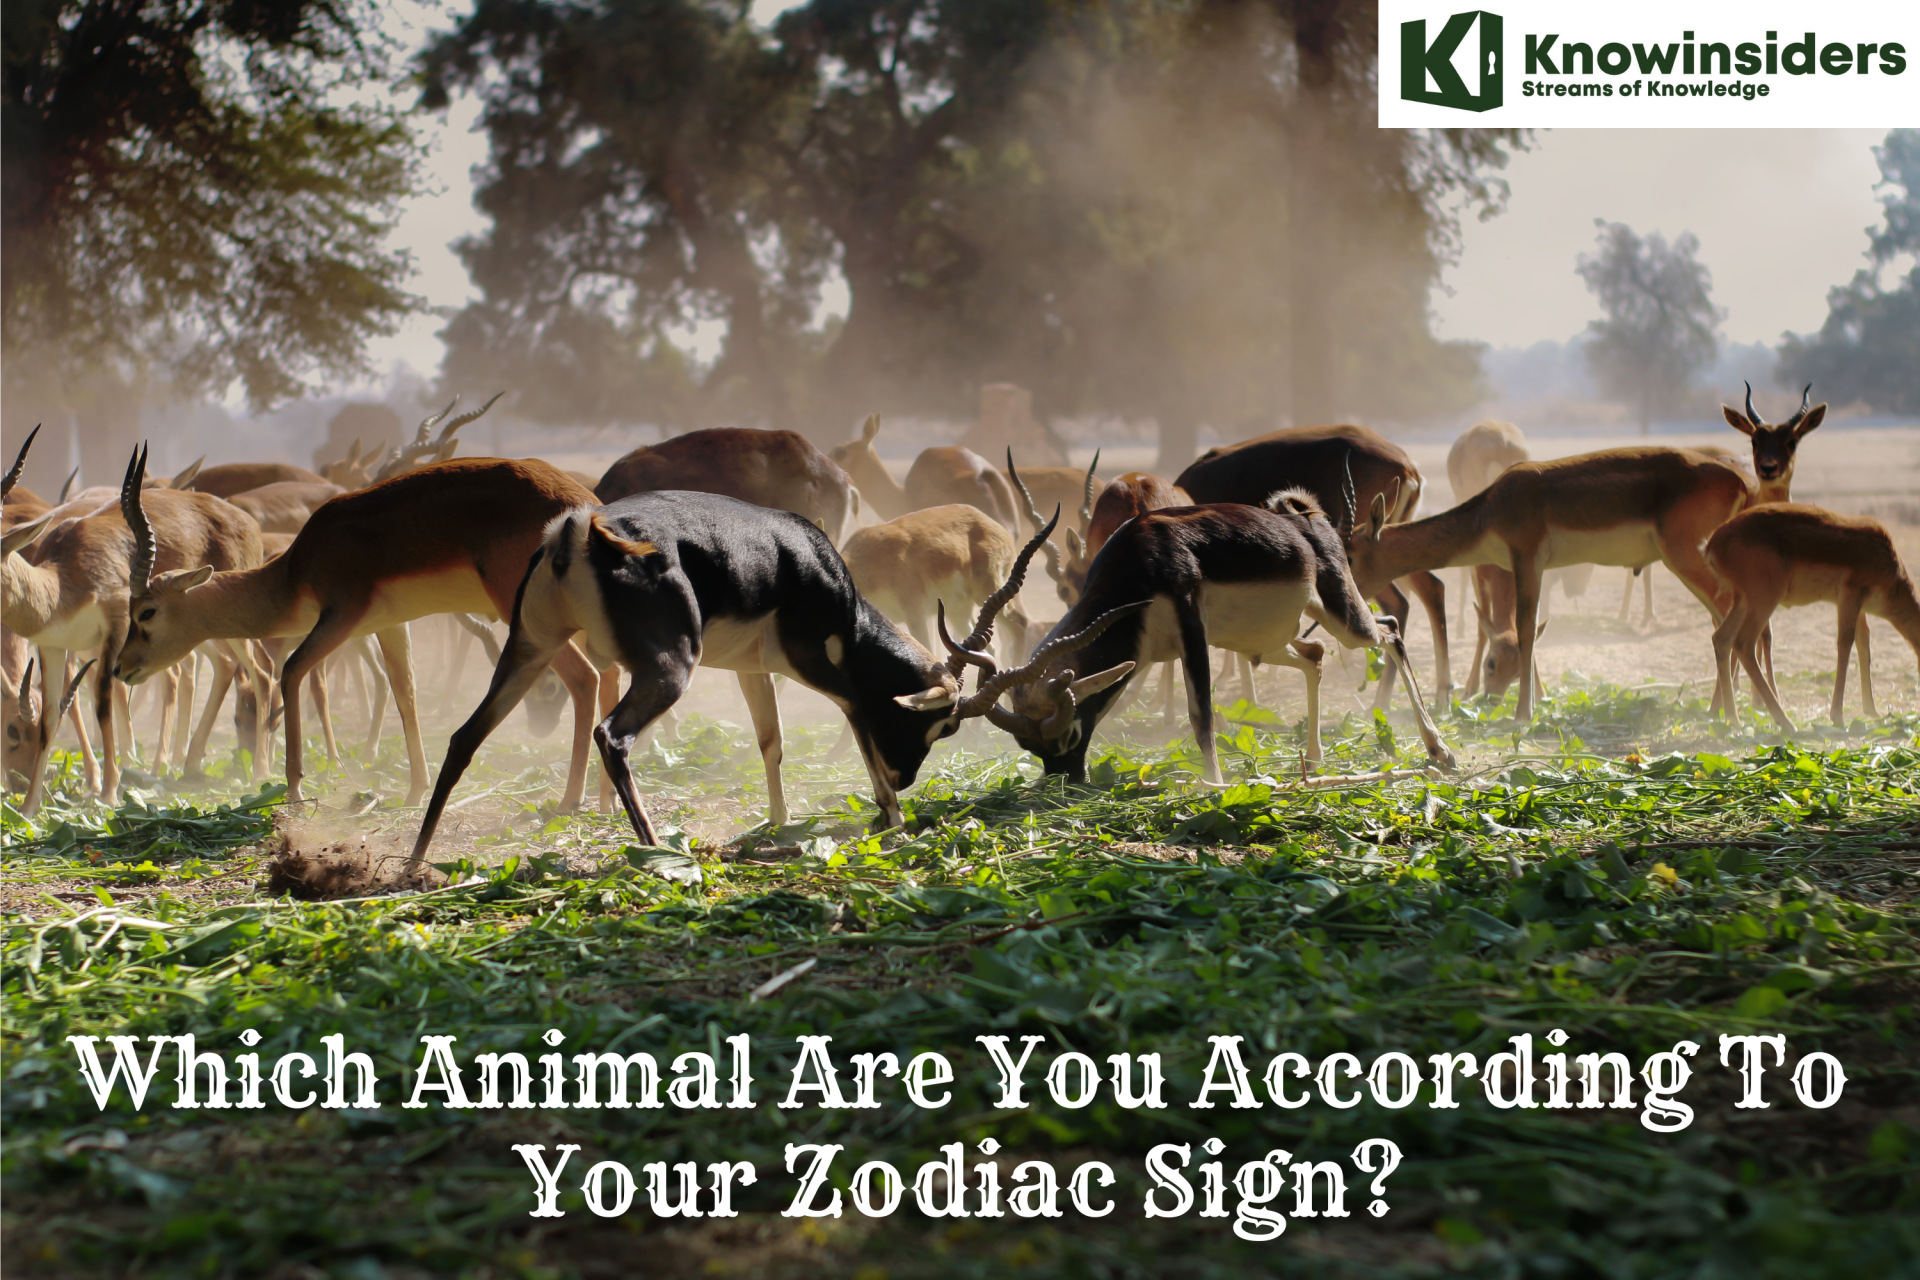 Which Animal Are You According To Your Zodiac Sign?